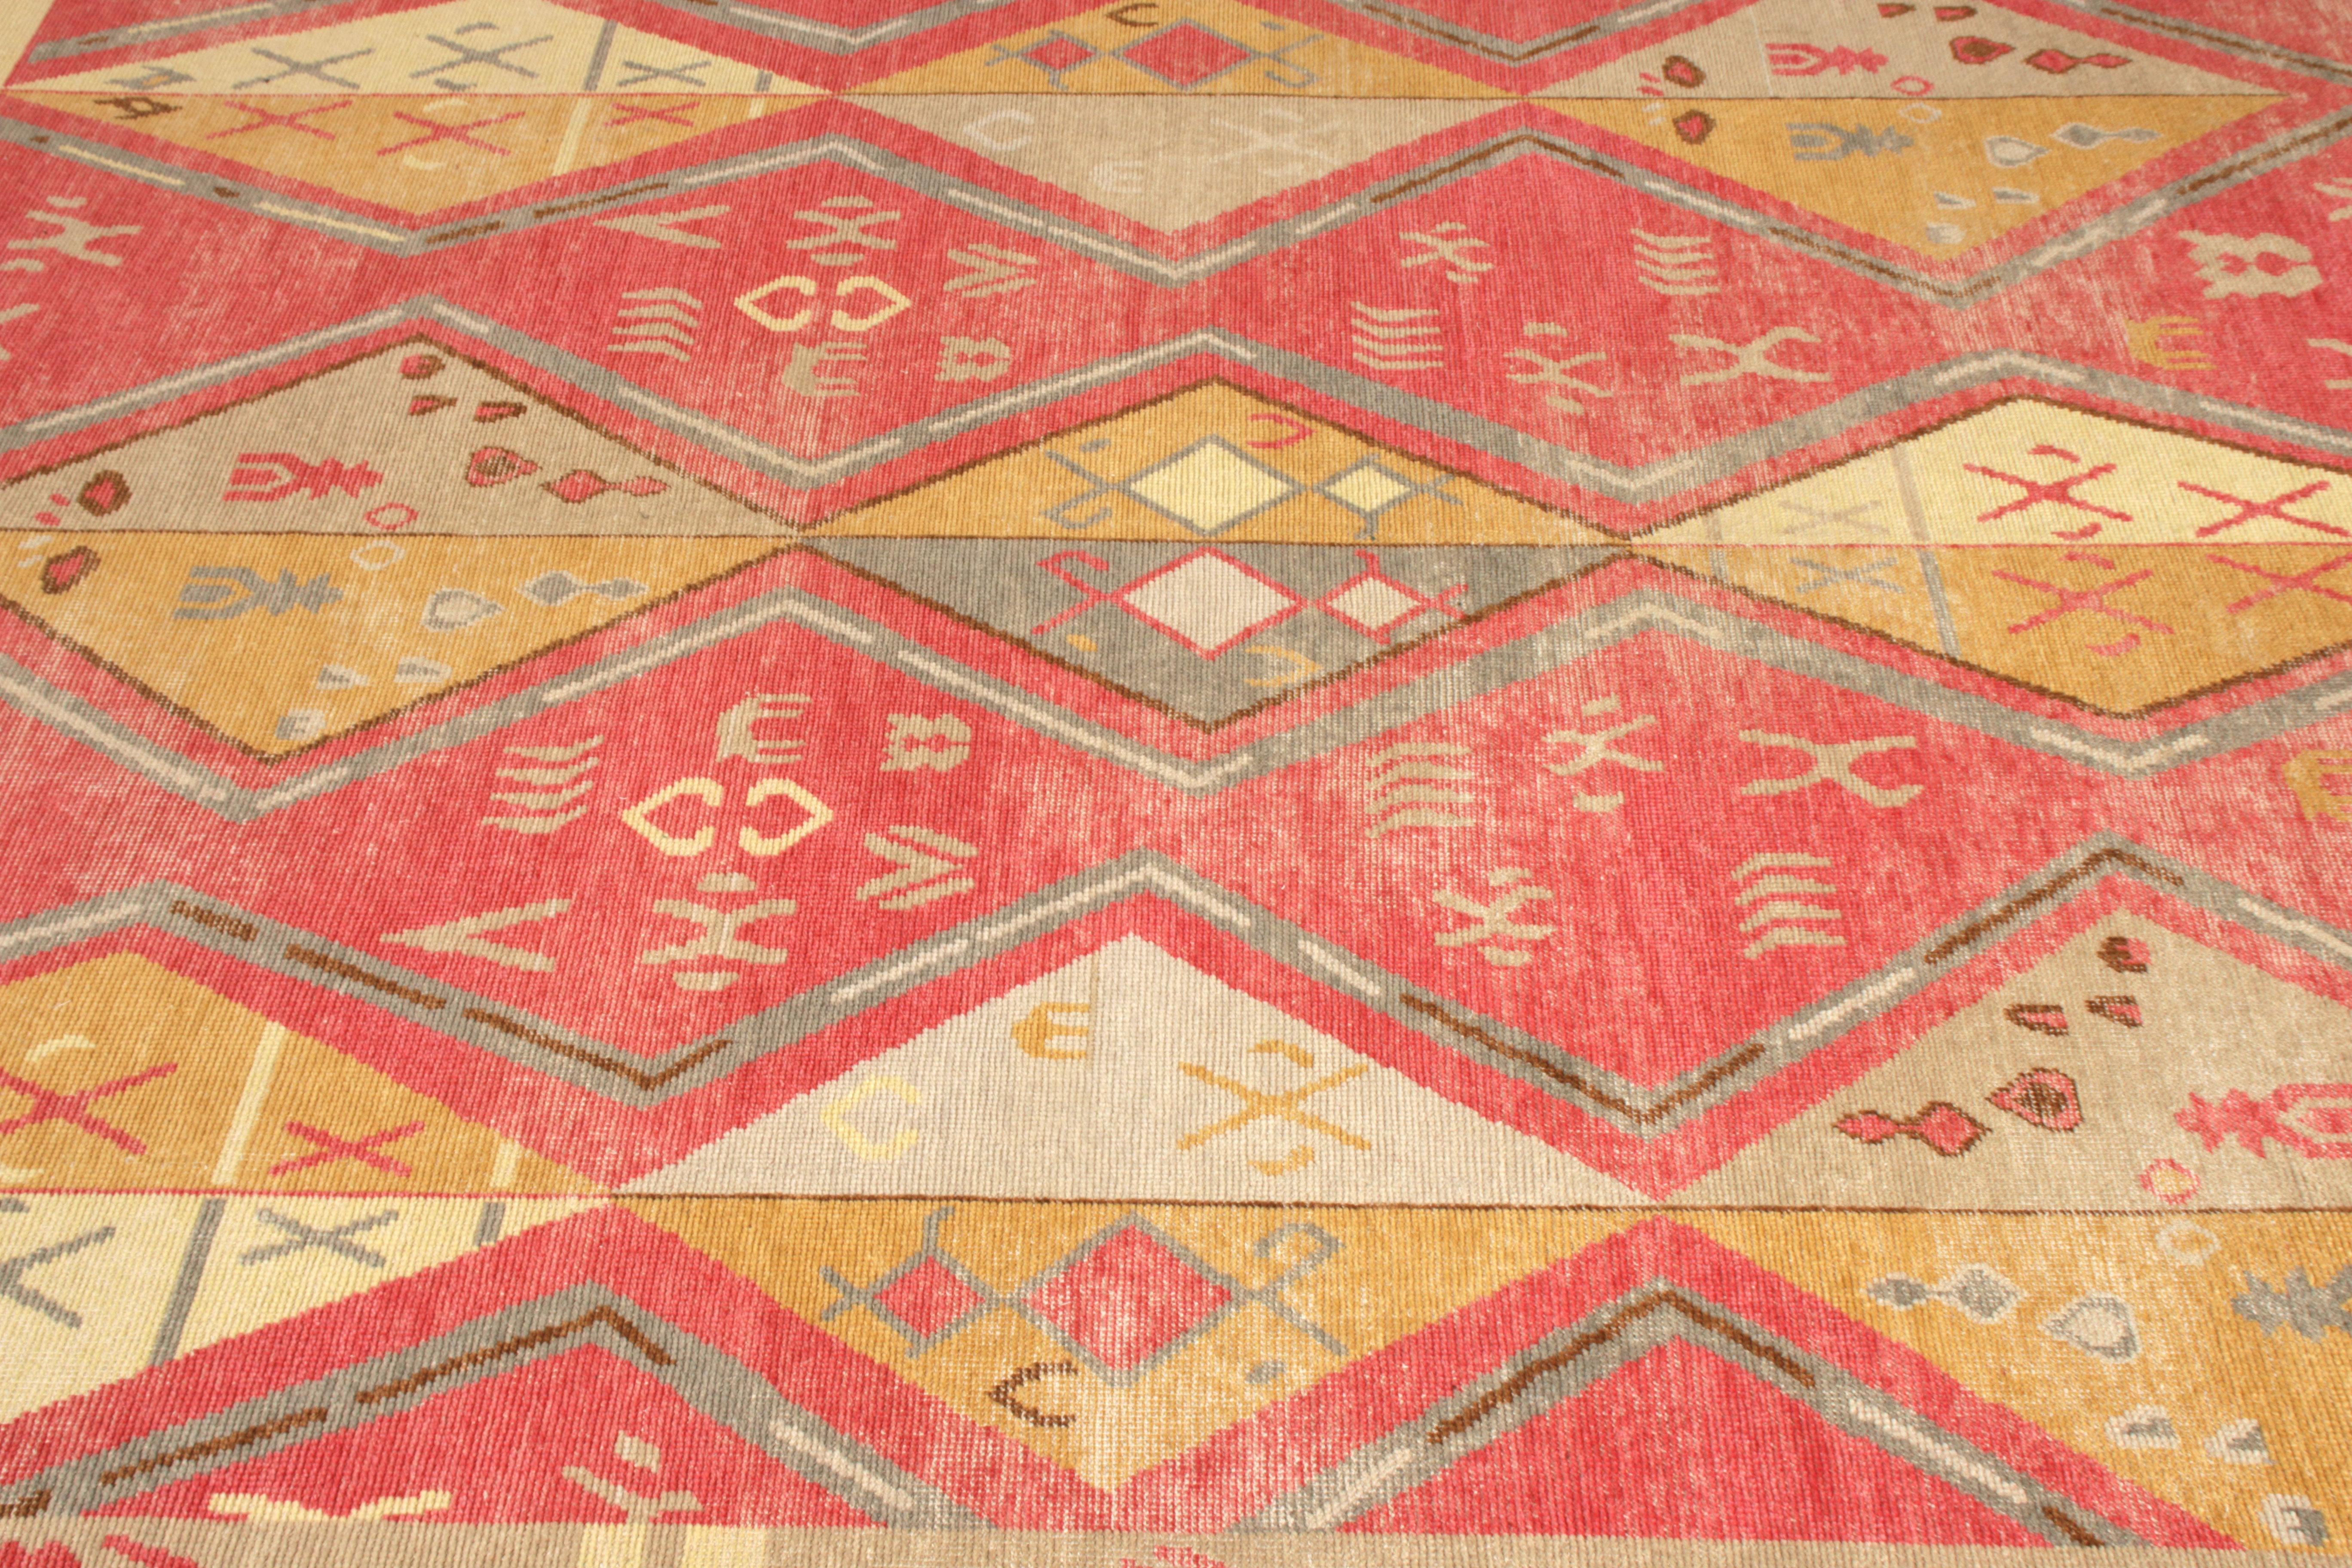 Indian Rug & Kilim's Hand-Knotted Tribal-Style Rug, Red Gold Diamond Pattern